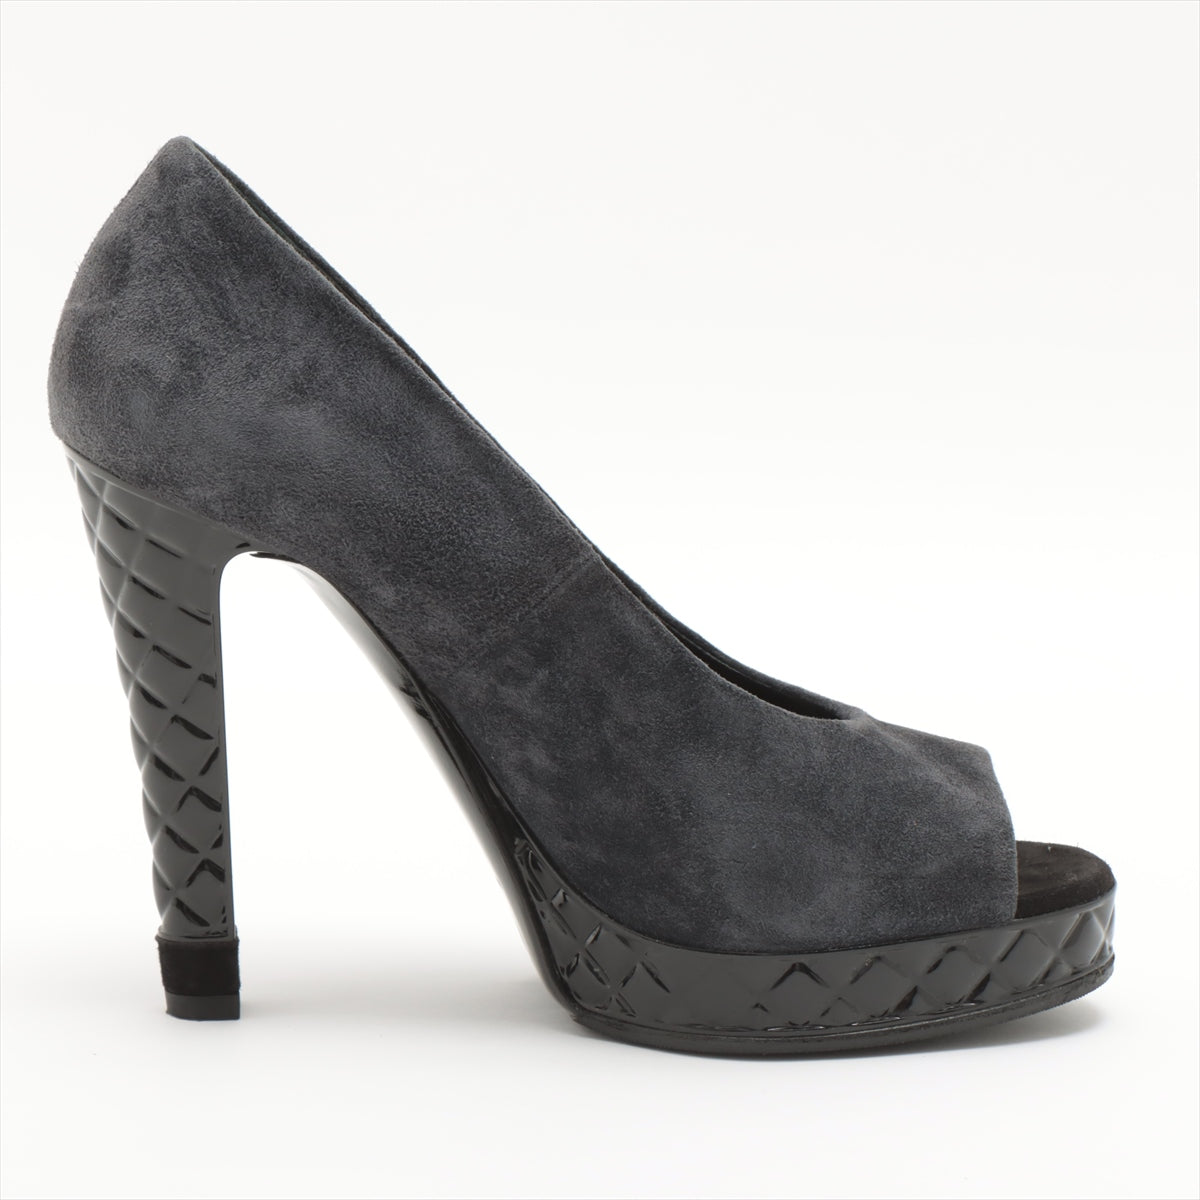 Chanel Coco Mark Suede leather Open-toe Pumps 37 C Ladies' Grey G34196